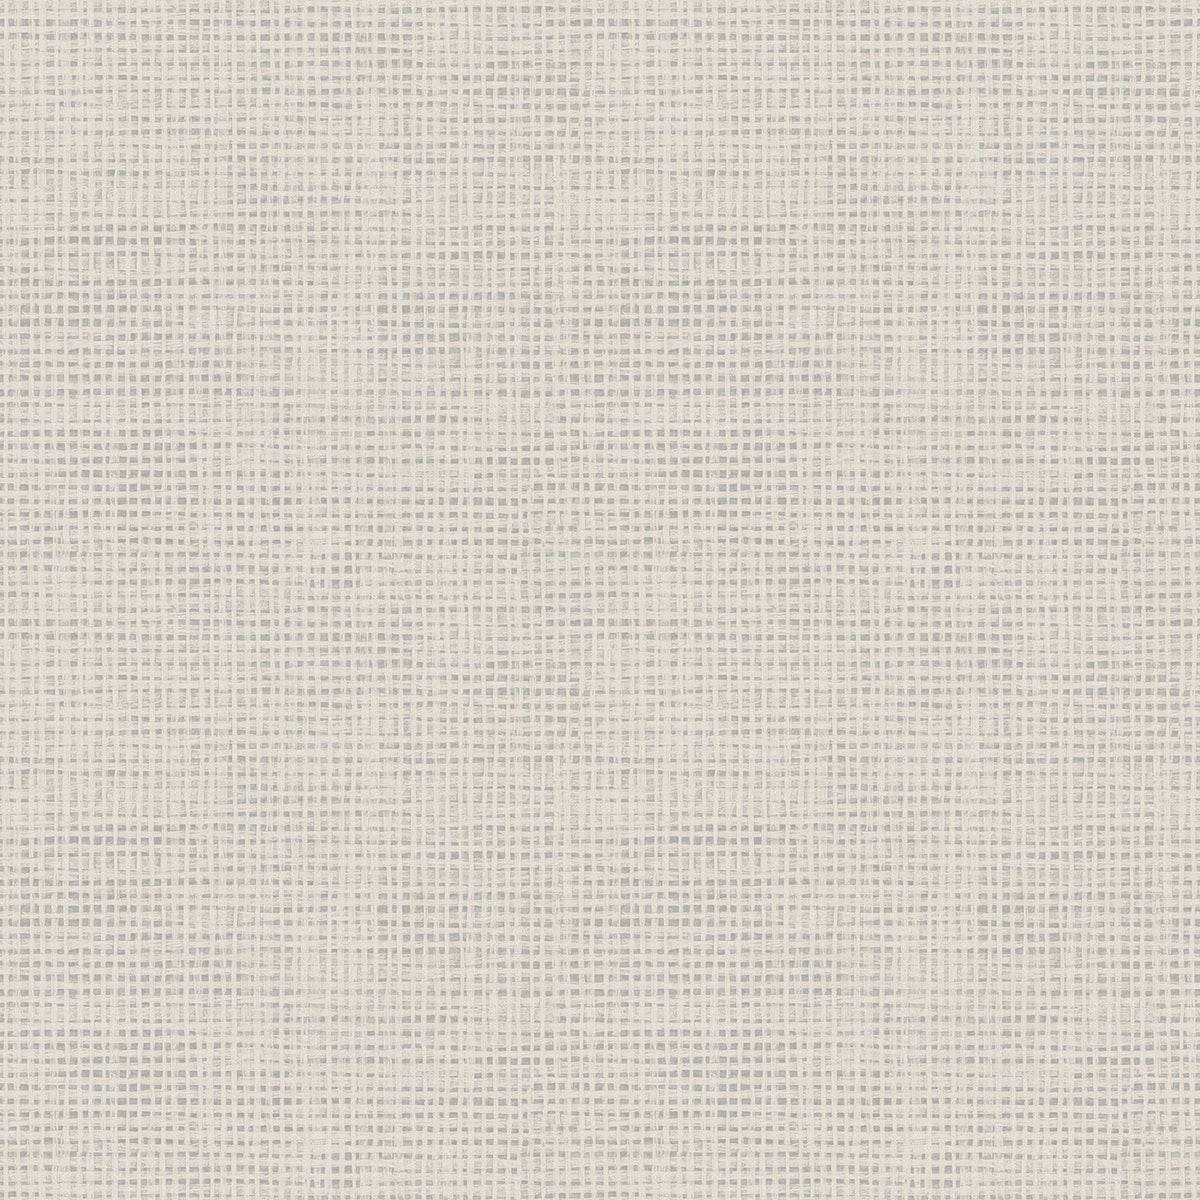 Picture of Nimmie Light Grey Woven Grasscloth Wallpaper